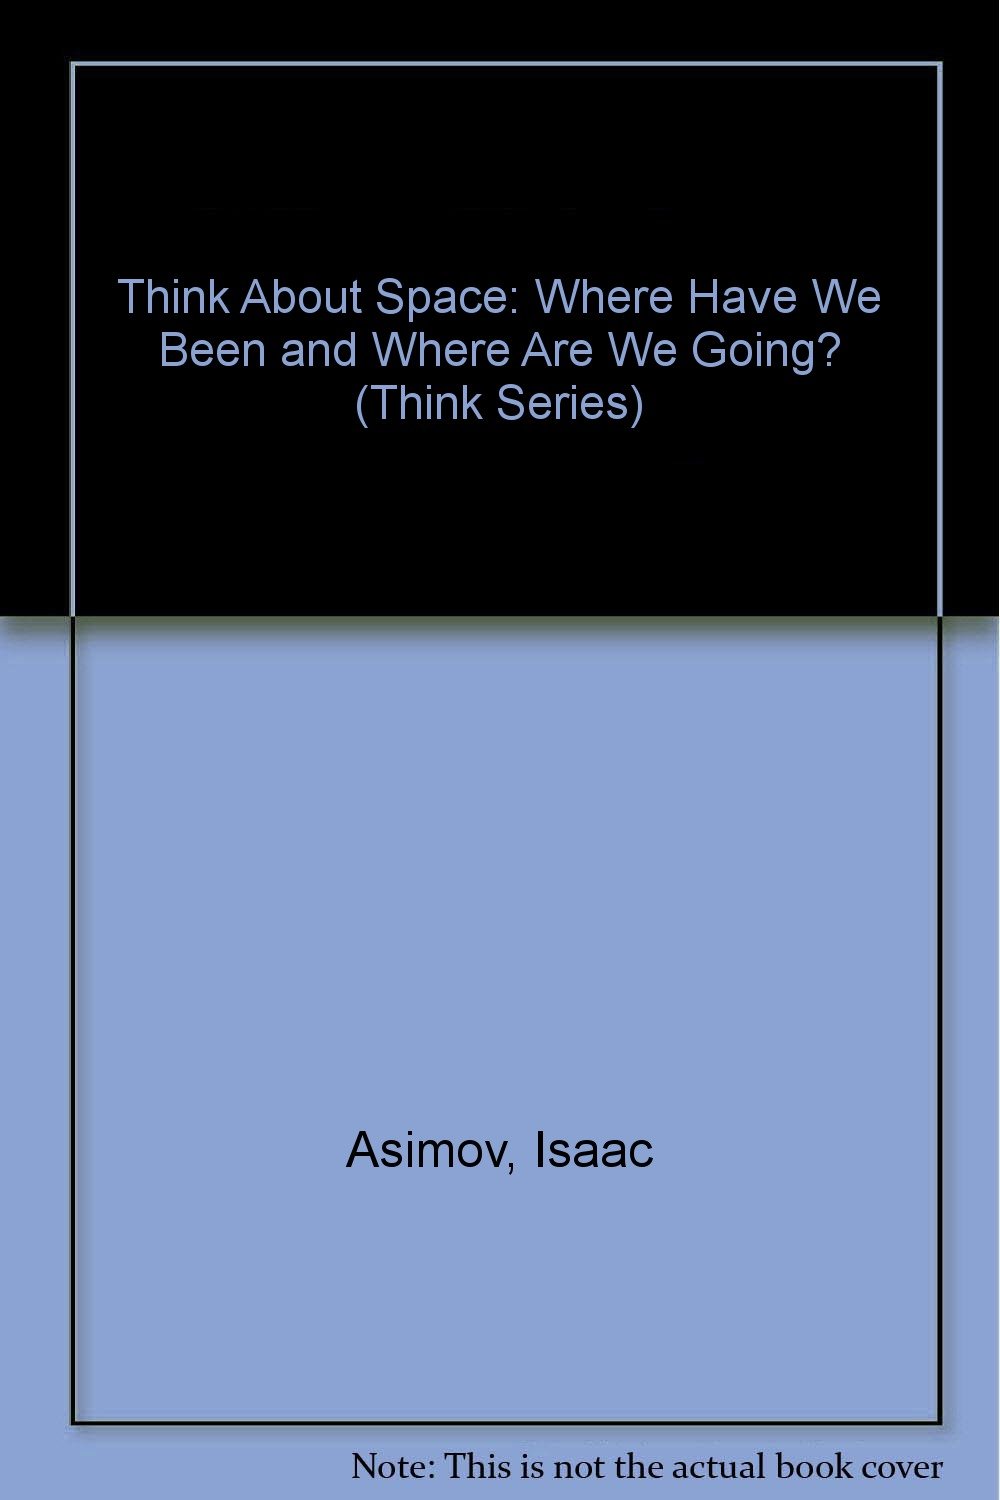 Think About Space: Where Have We Been and Where Are We Going? book cover